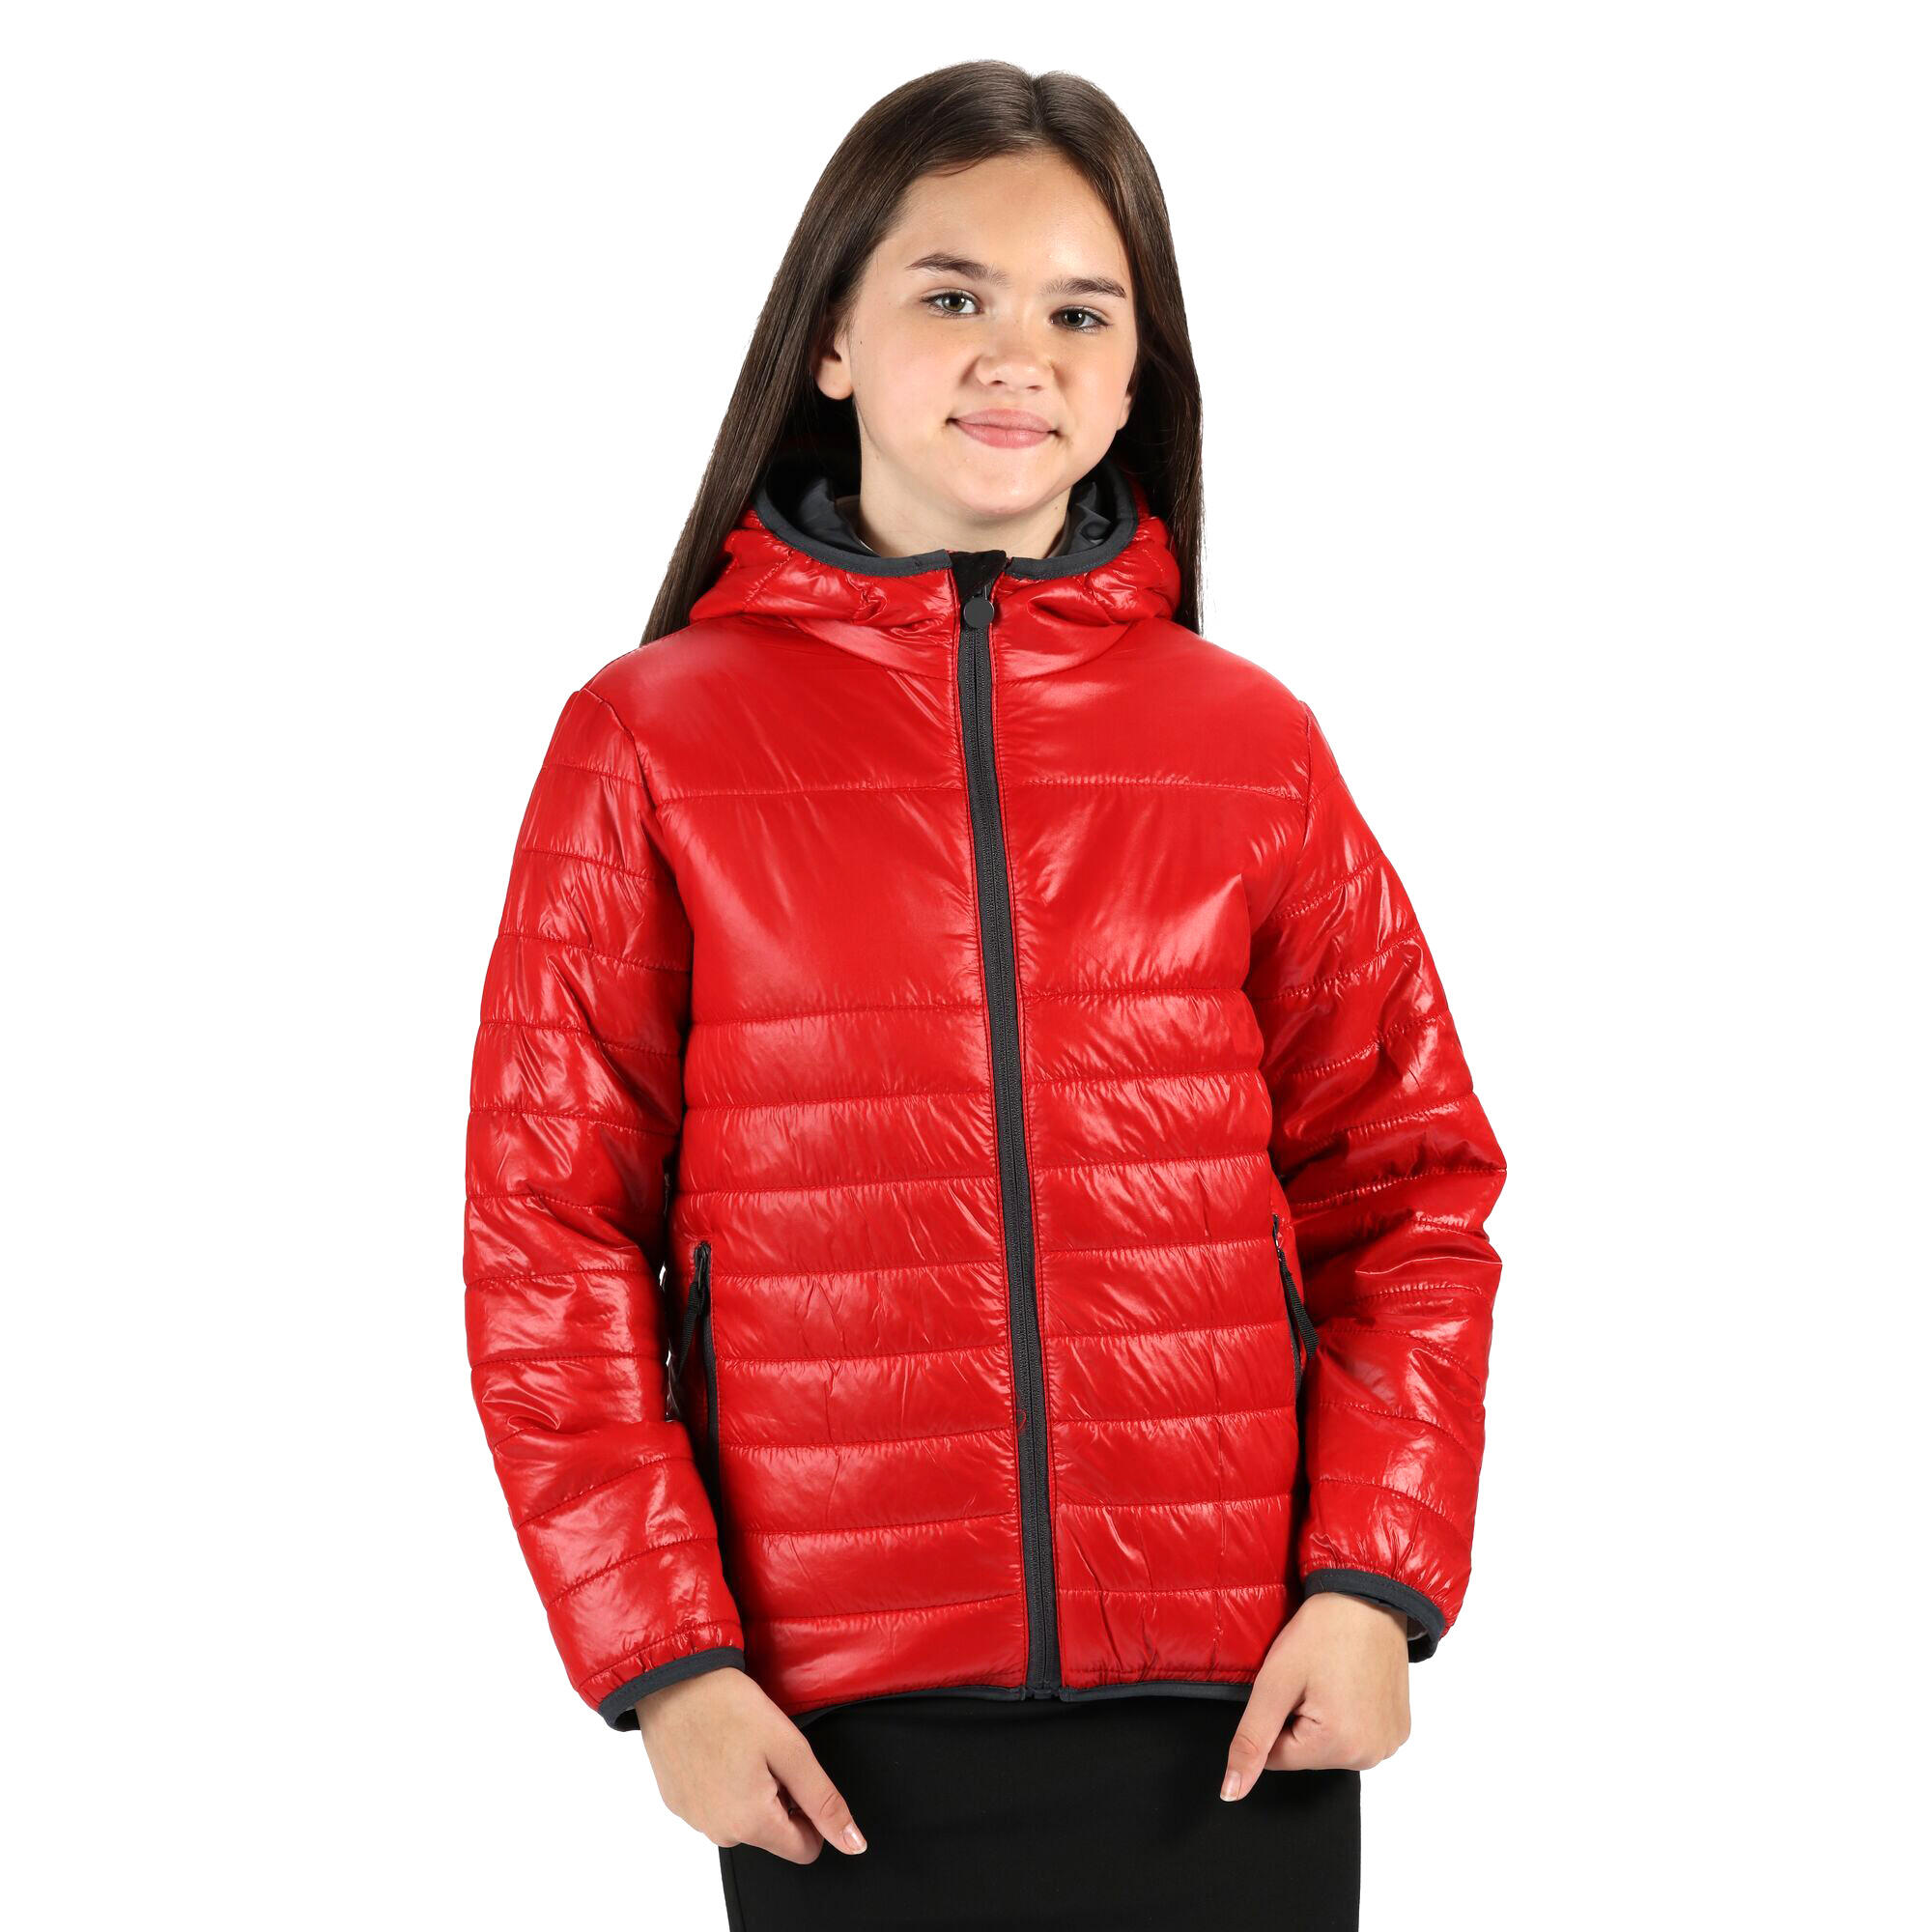 Childrens/Kids Stormforce Thermal Insulated Jacket (Classic Red) 1/4